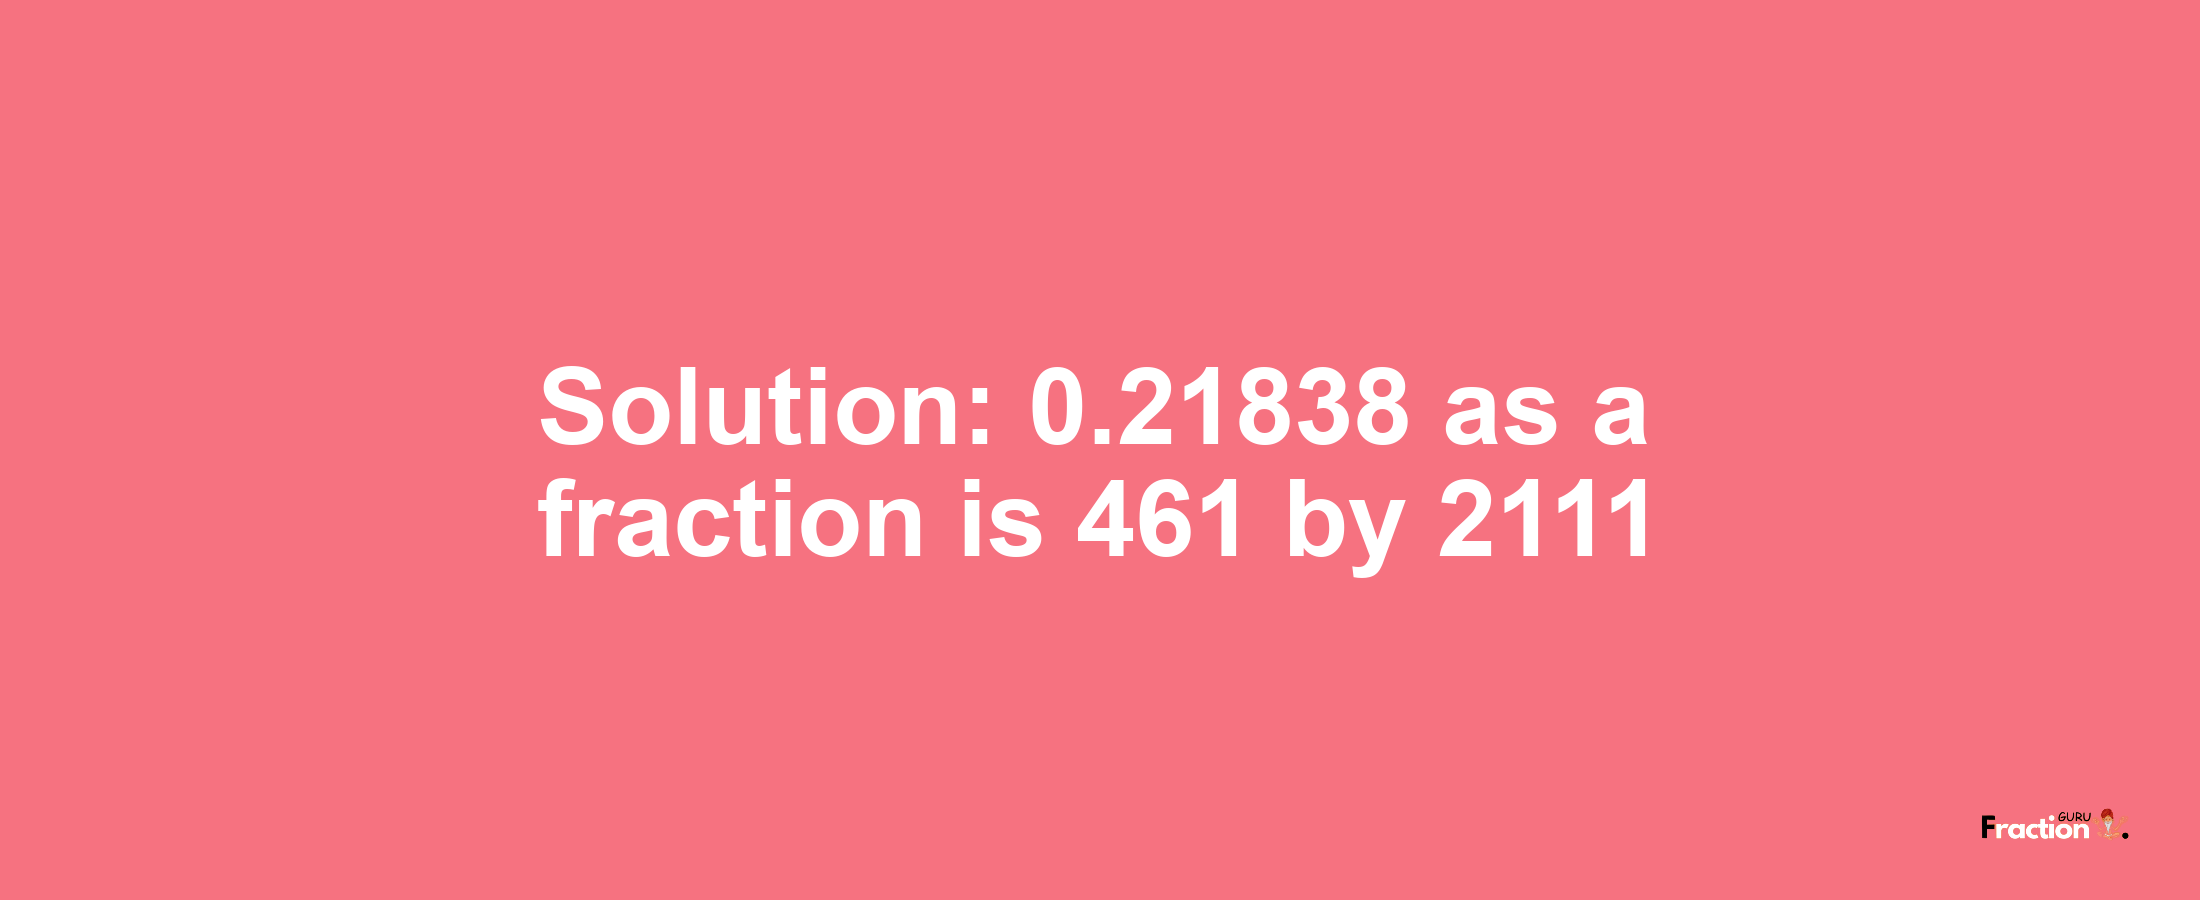 Solution:0.21838 as a fraction is 461/2111